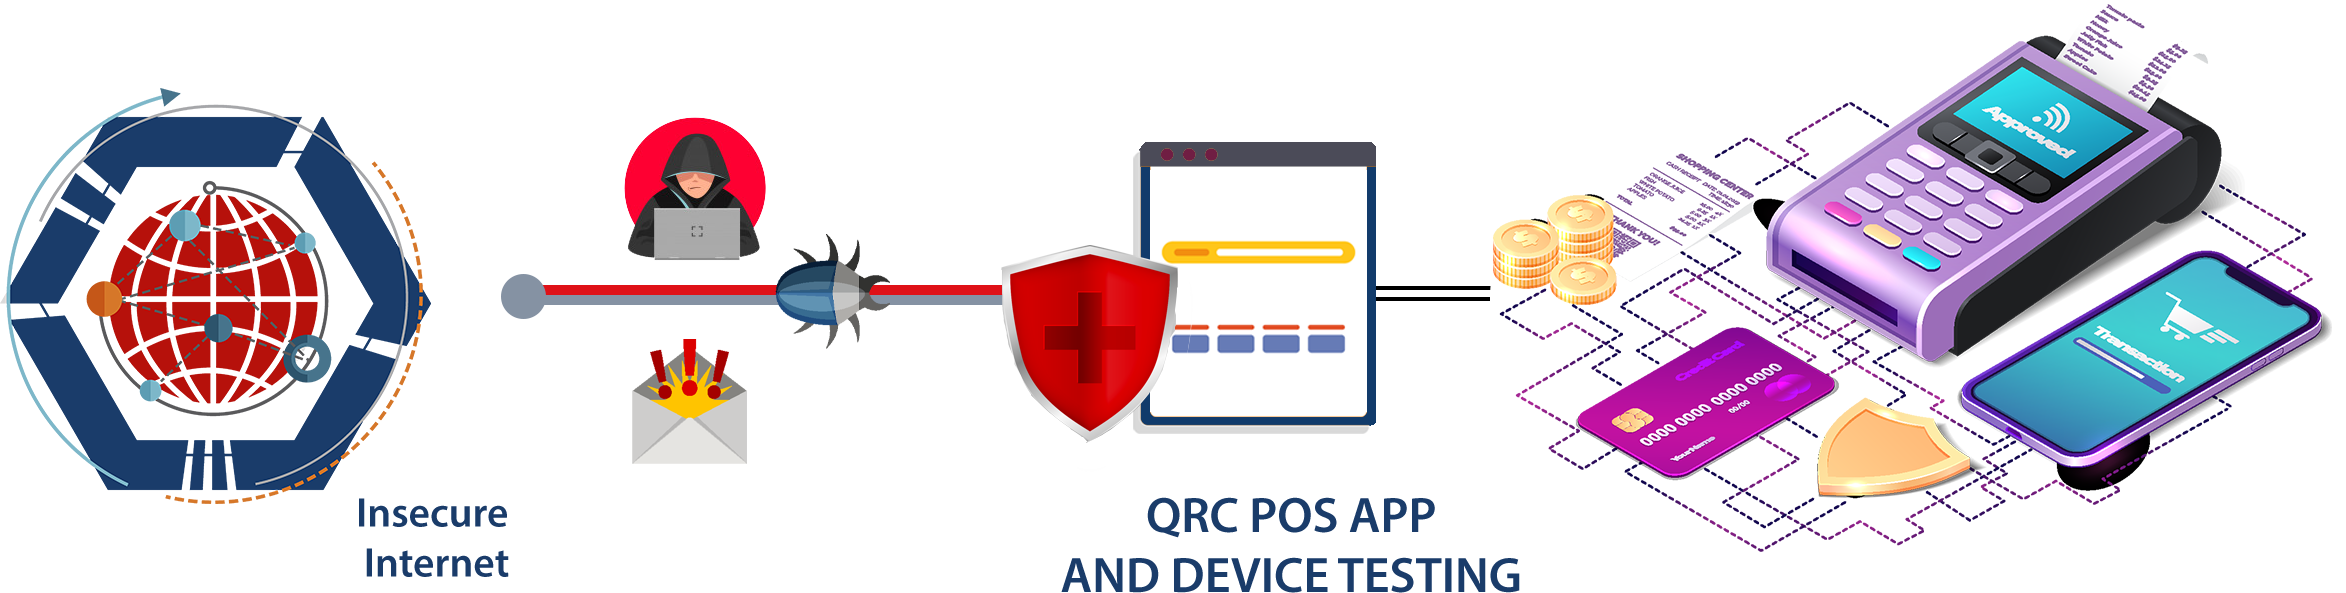 POS Application Security Testing